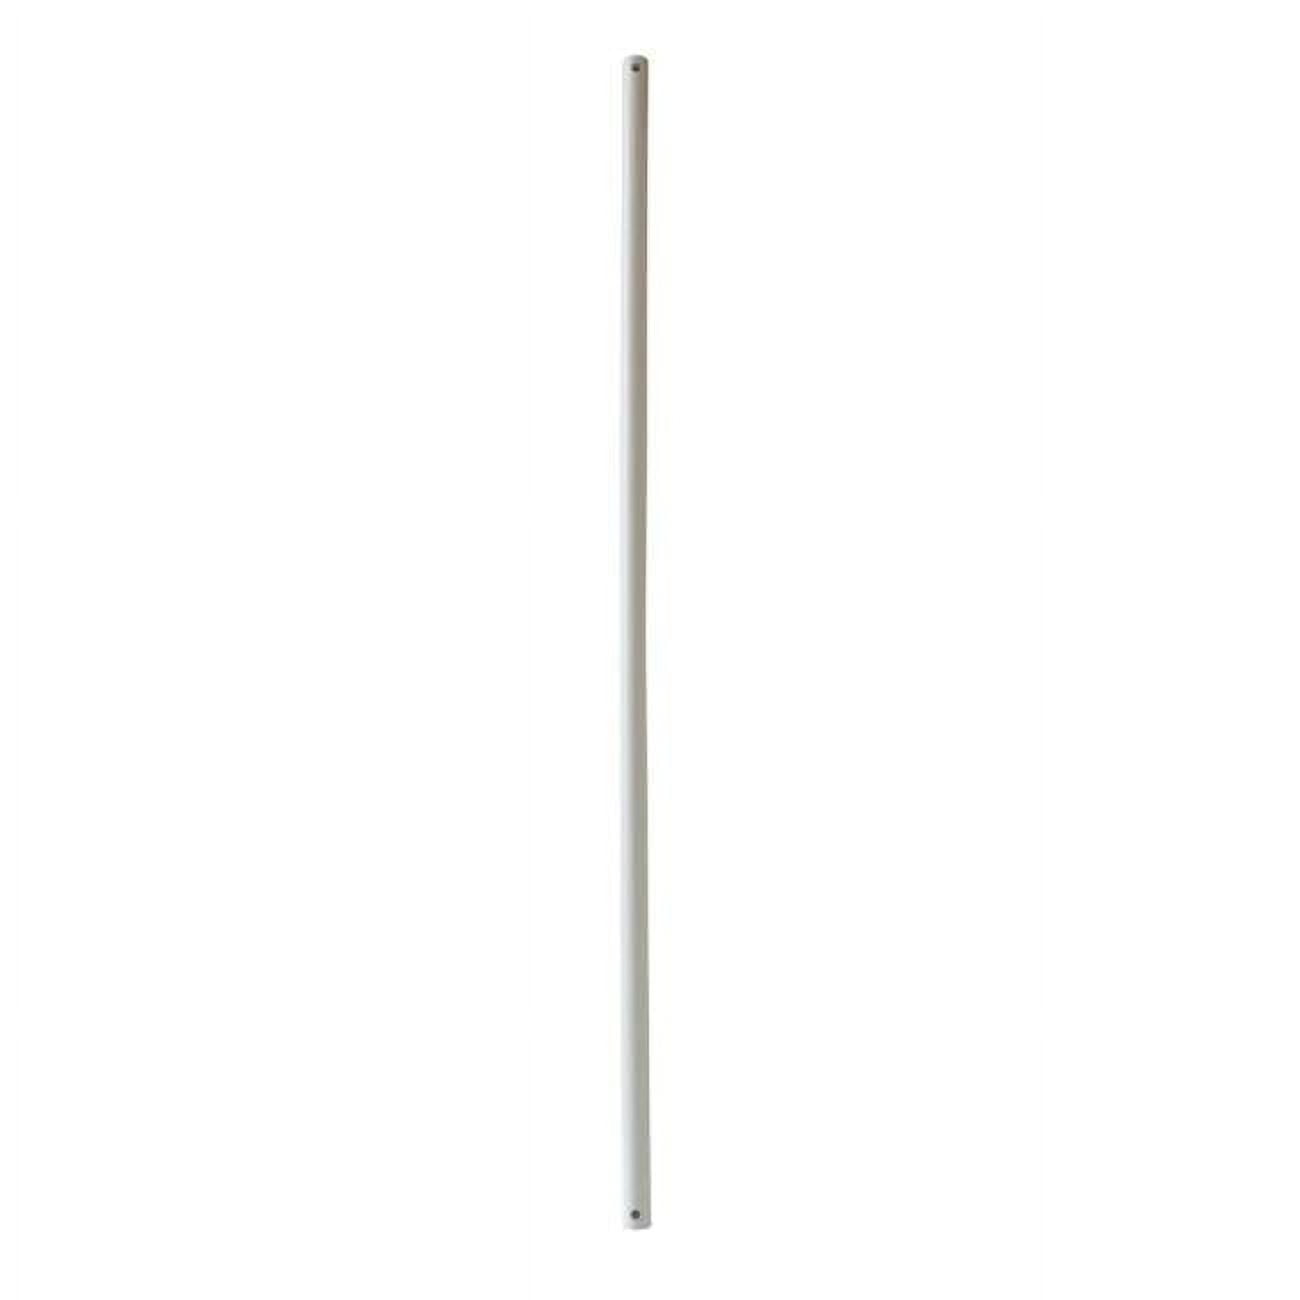 Picture of Lucci Air 21058424 Lucci Air Antique White 24in. Downrod